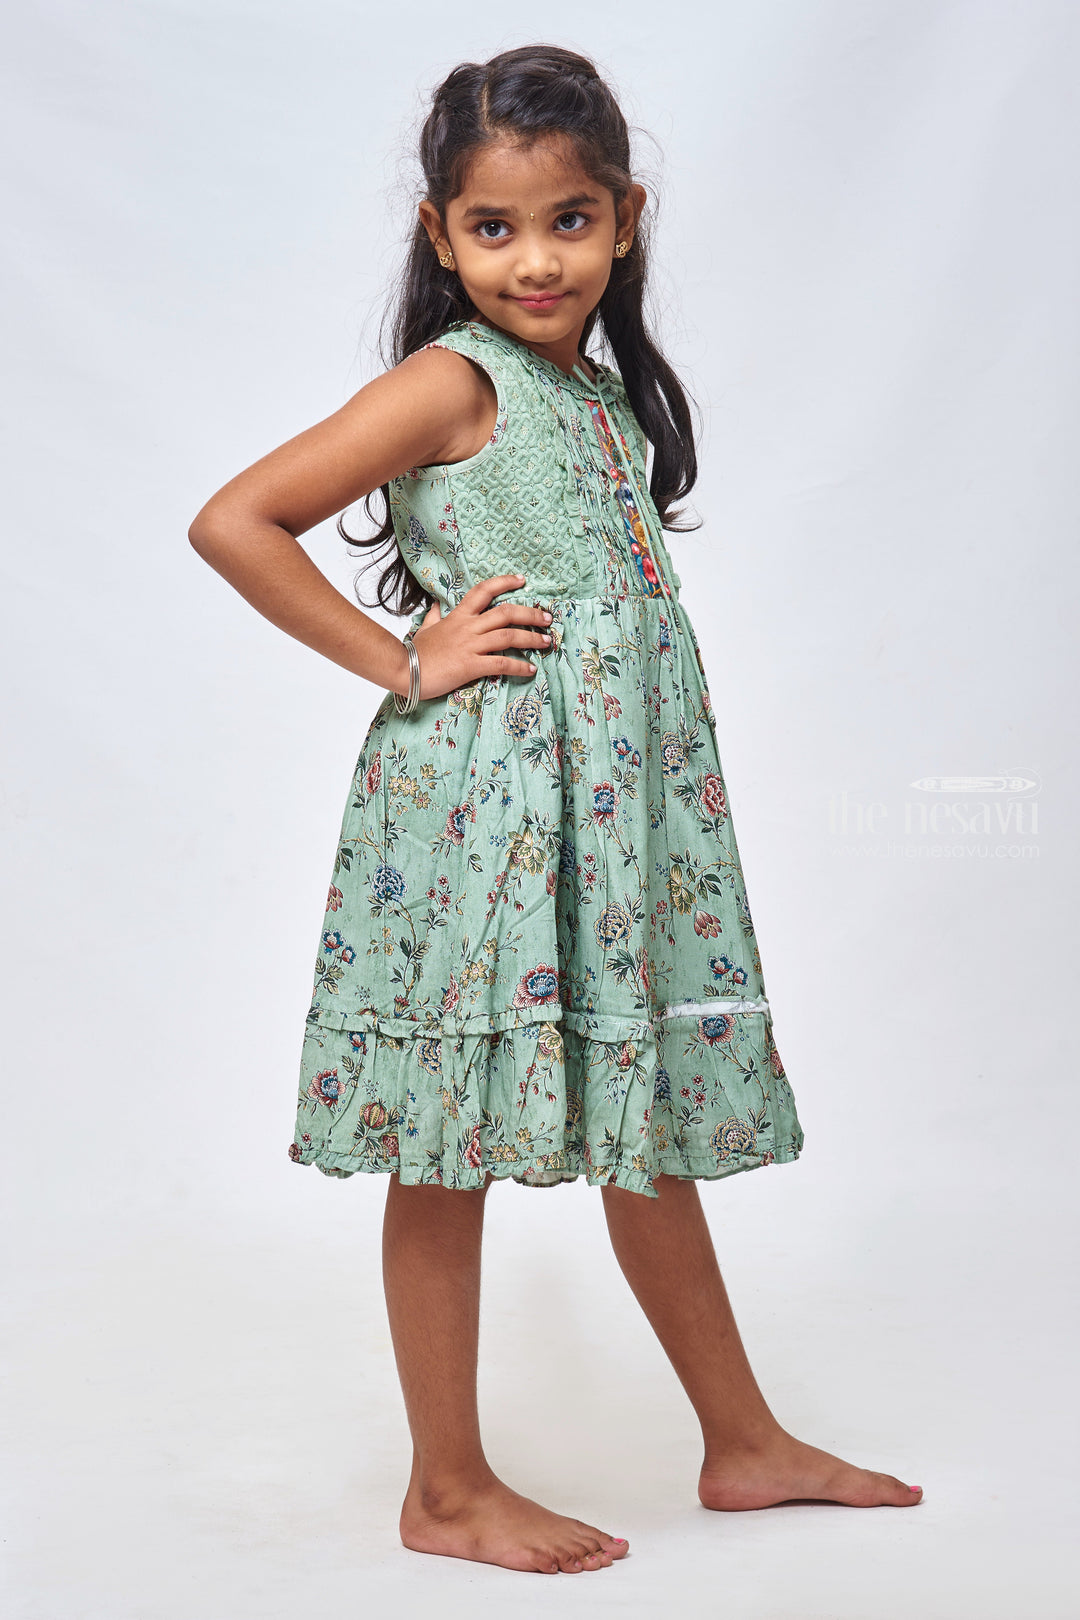 The Nesavu Girls Cotton Frock Blue Blossom: Girls Sleeveless Floral Cotton Frock Nesavu Unique Baby Frocks: Find the Perfect Cotton Dress for Every Occasion | The Nesavu